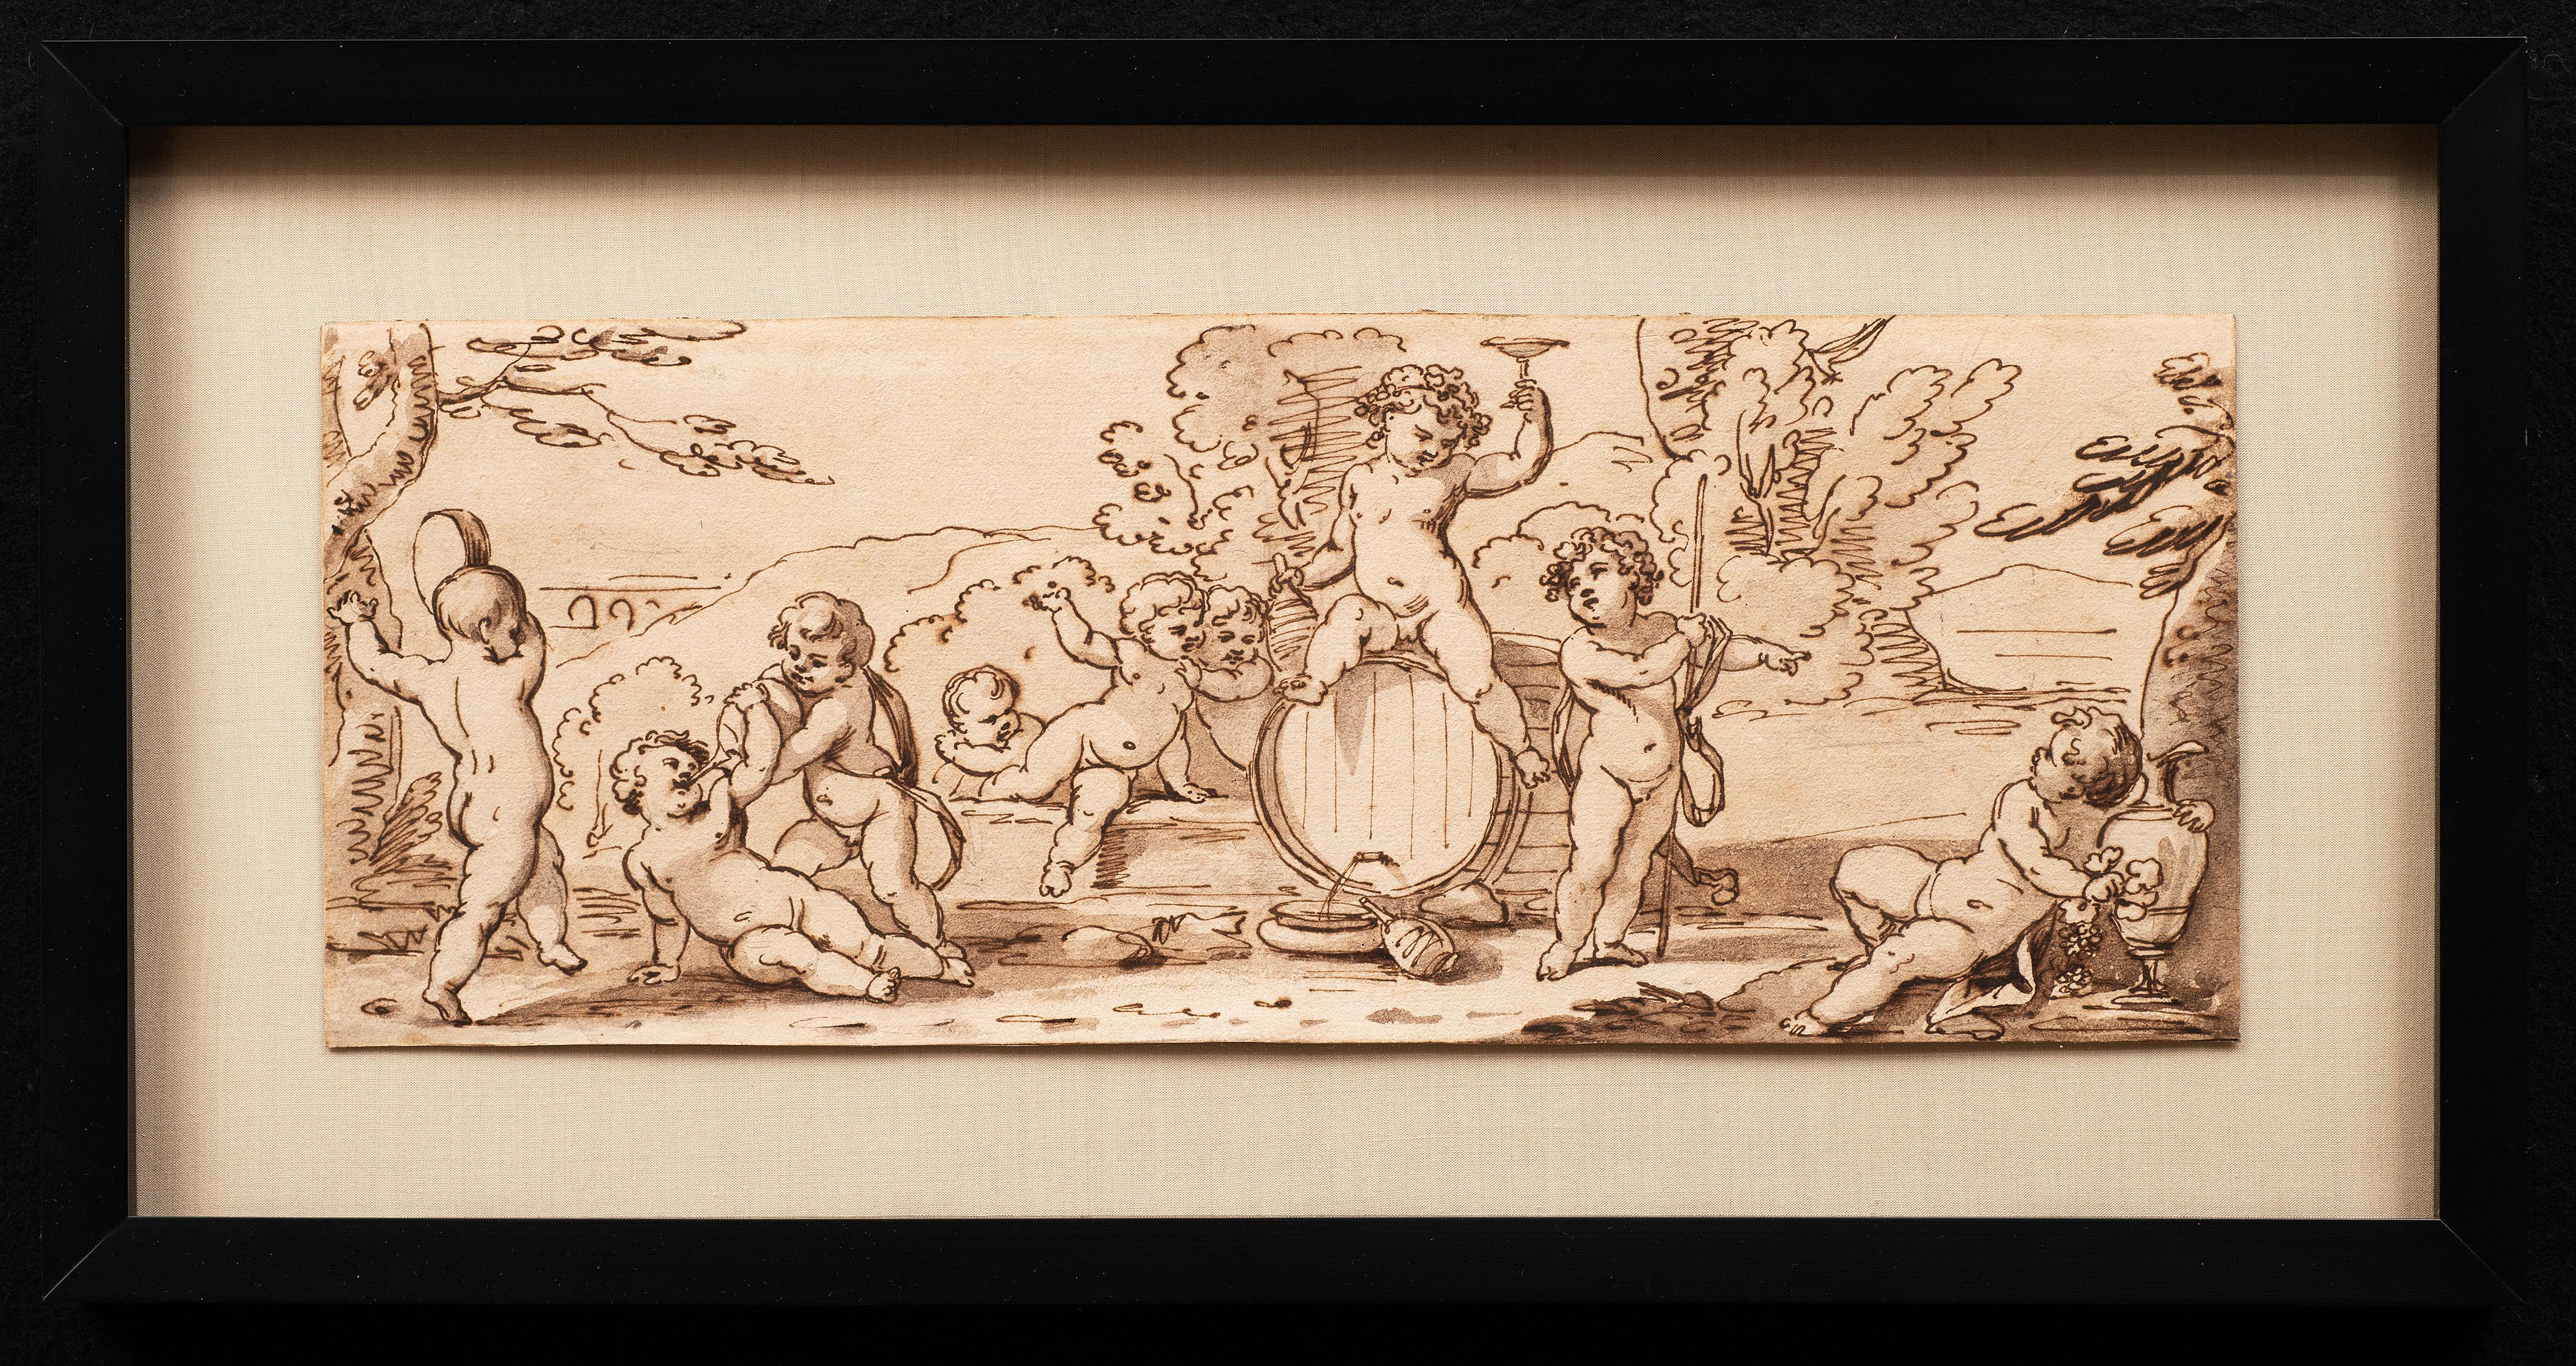 Unknown Nude Painting - Antique Italian School Late 17th - Early 18th "Cherubs (B)" Pen drawing of Putti